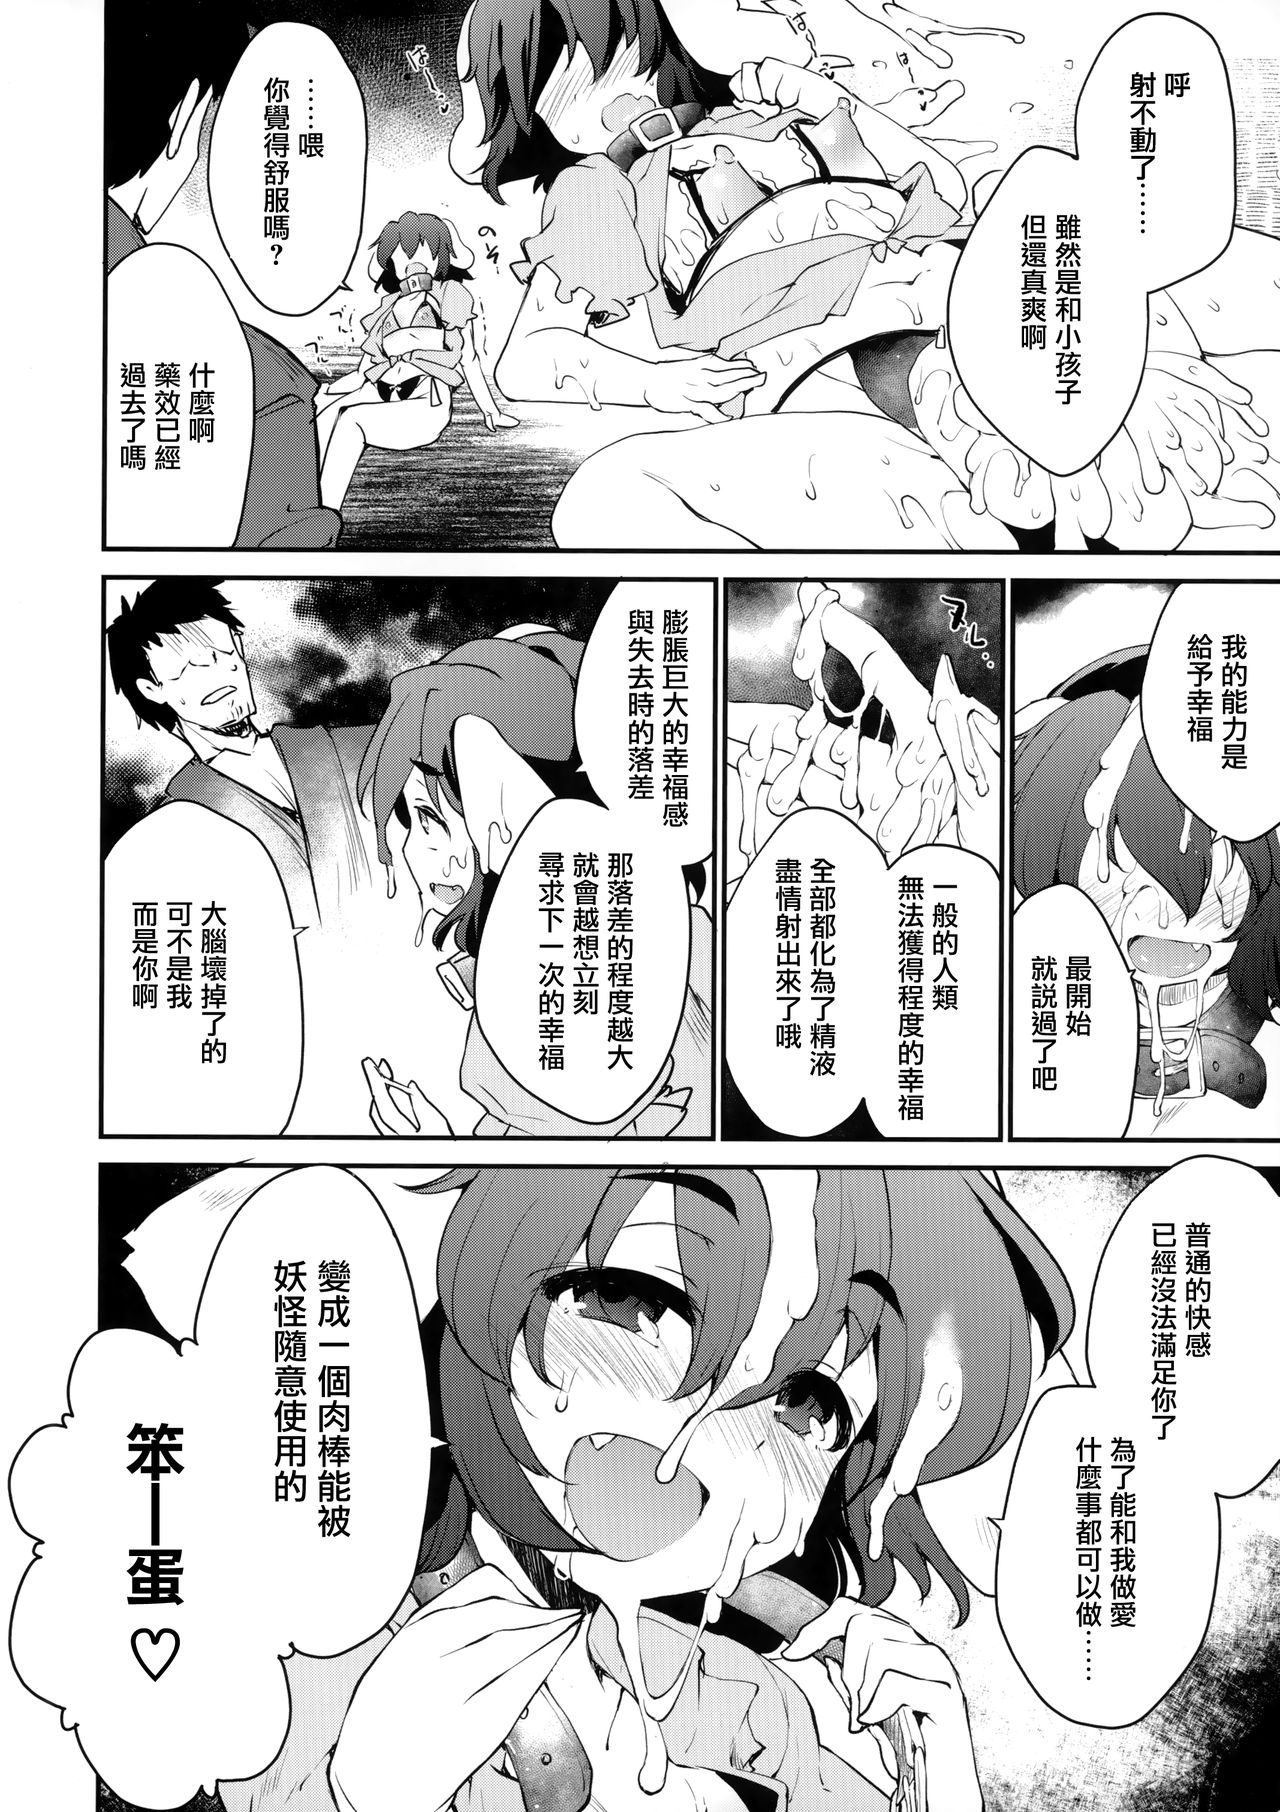 (Reitaisai 16) [IncluDe (Foolest)] Cum Cum Happiness Heart (Touhou Project) [Chinese] [命蓮寺漢化組] (例大祭16) [IncluDe (ふぅりすと)] Cum Cum Happiness Heart (東方Project) [中国翻訳]